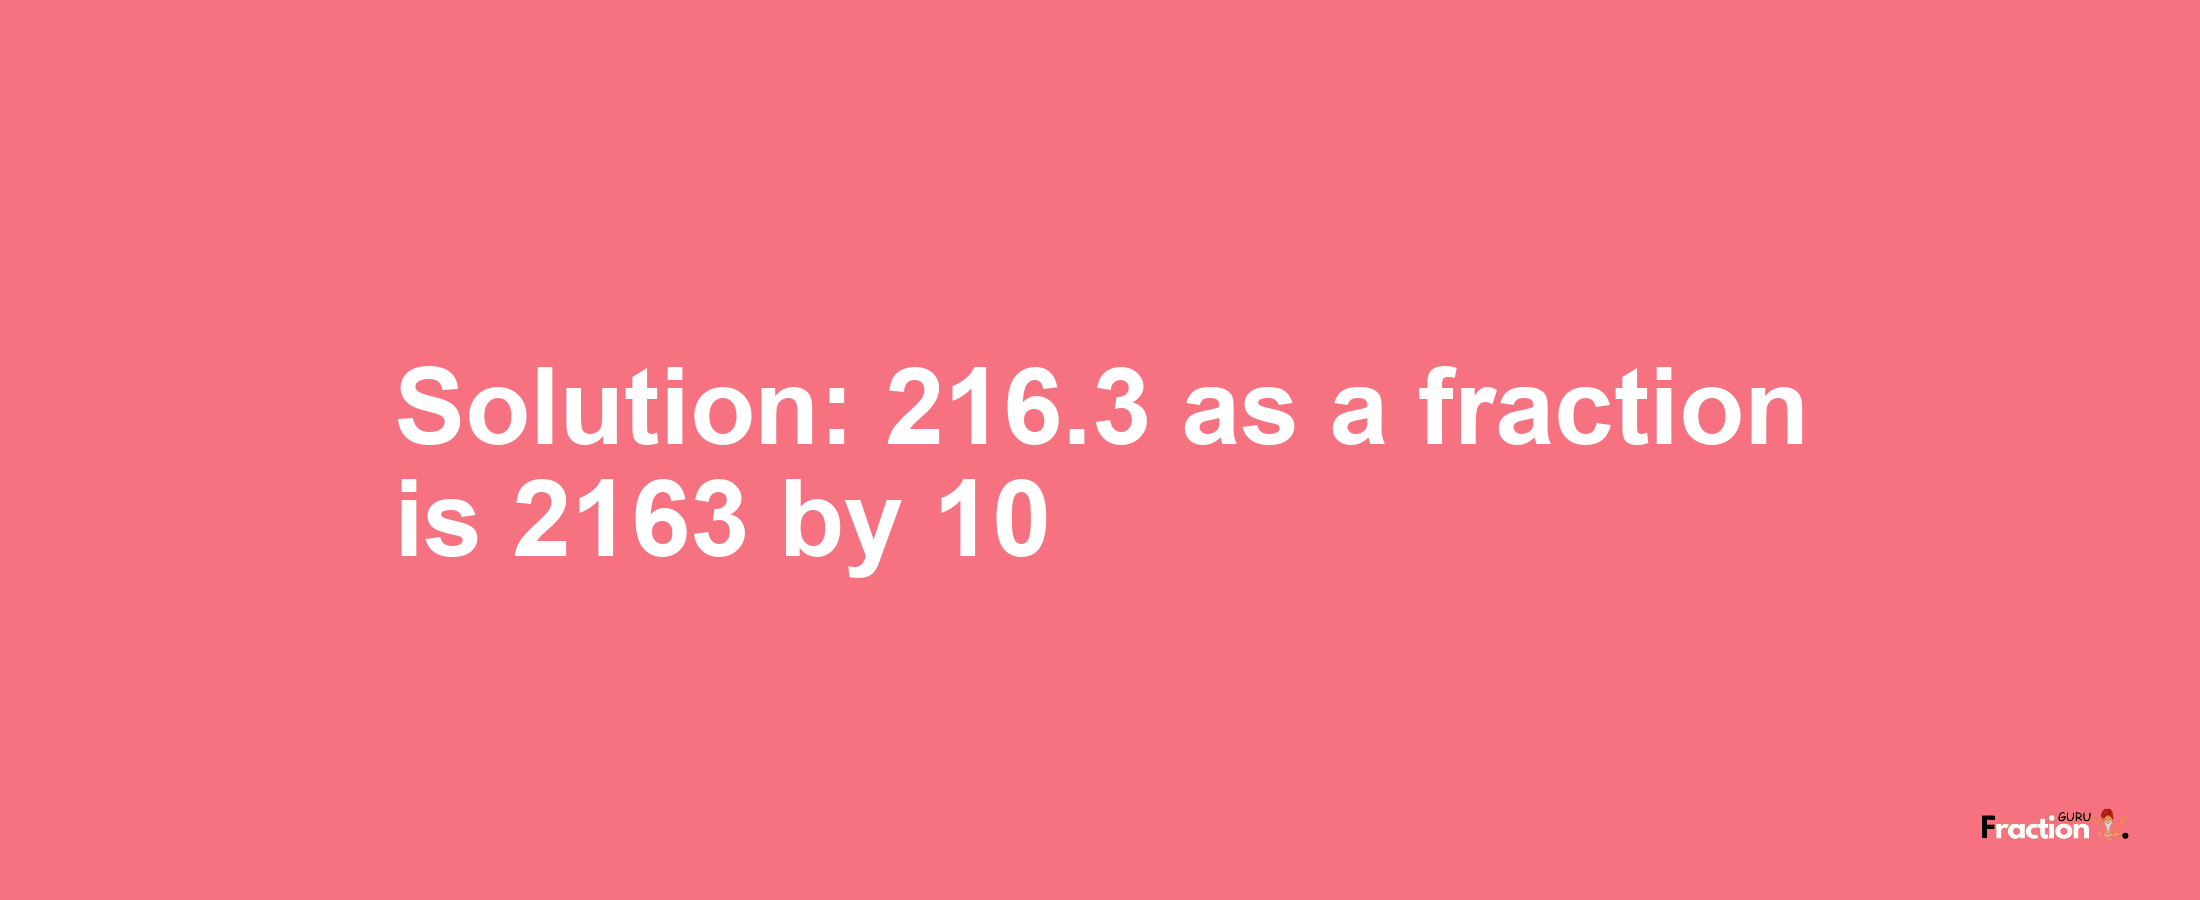 Solution:216.3 as a fraction is 2163/10